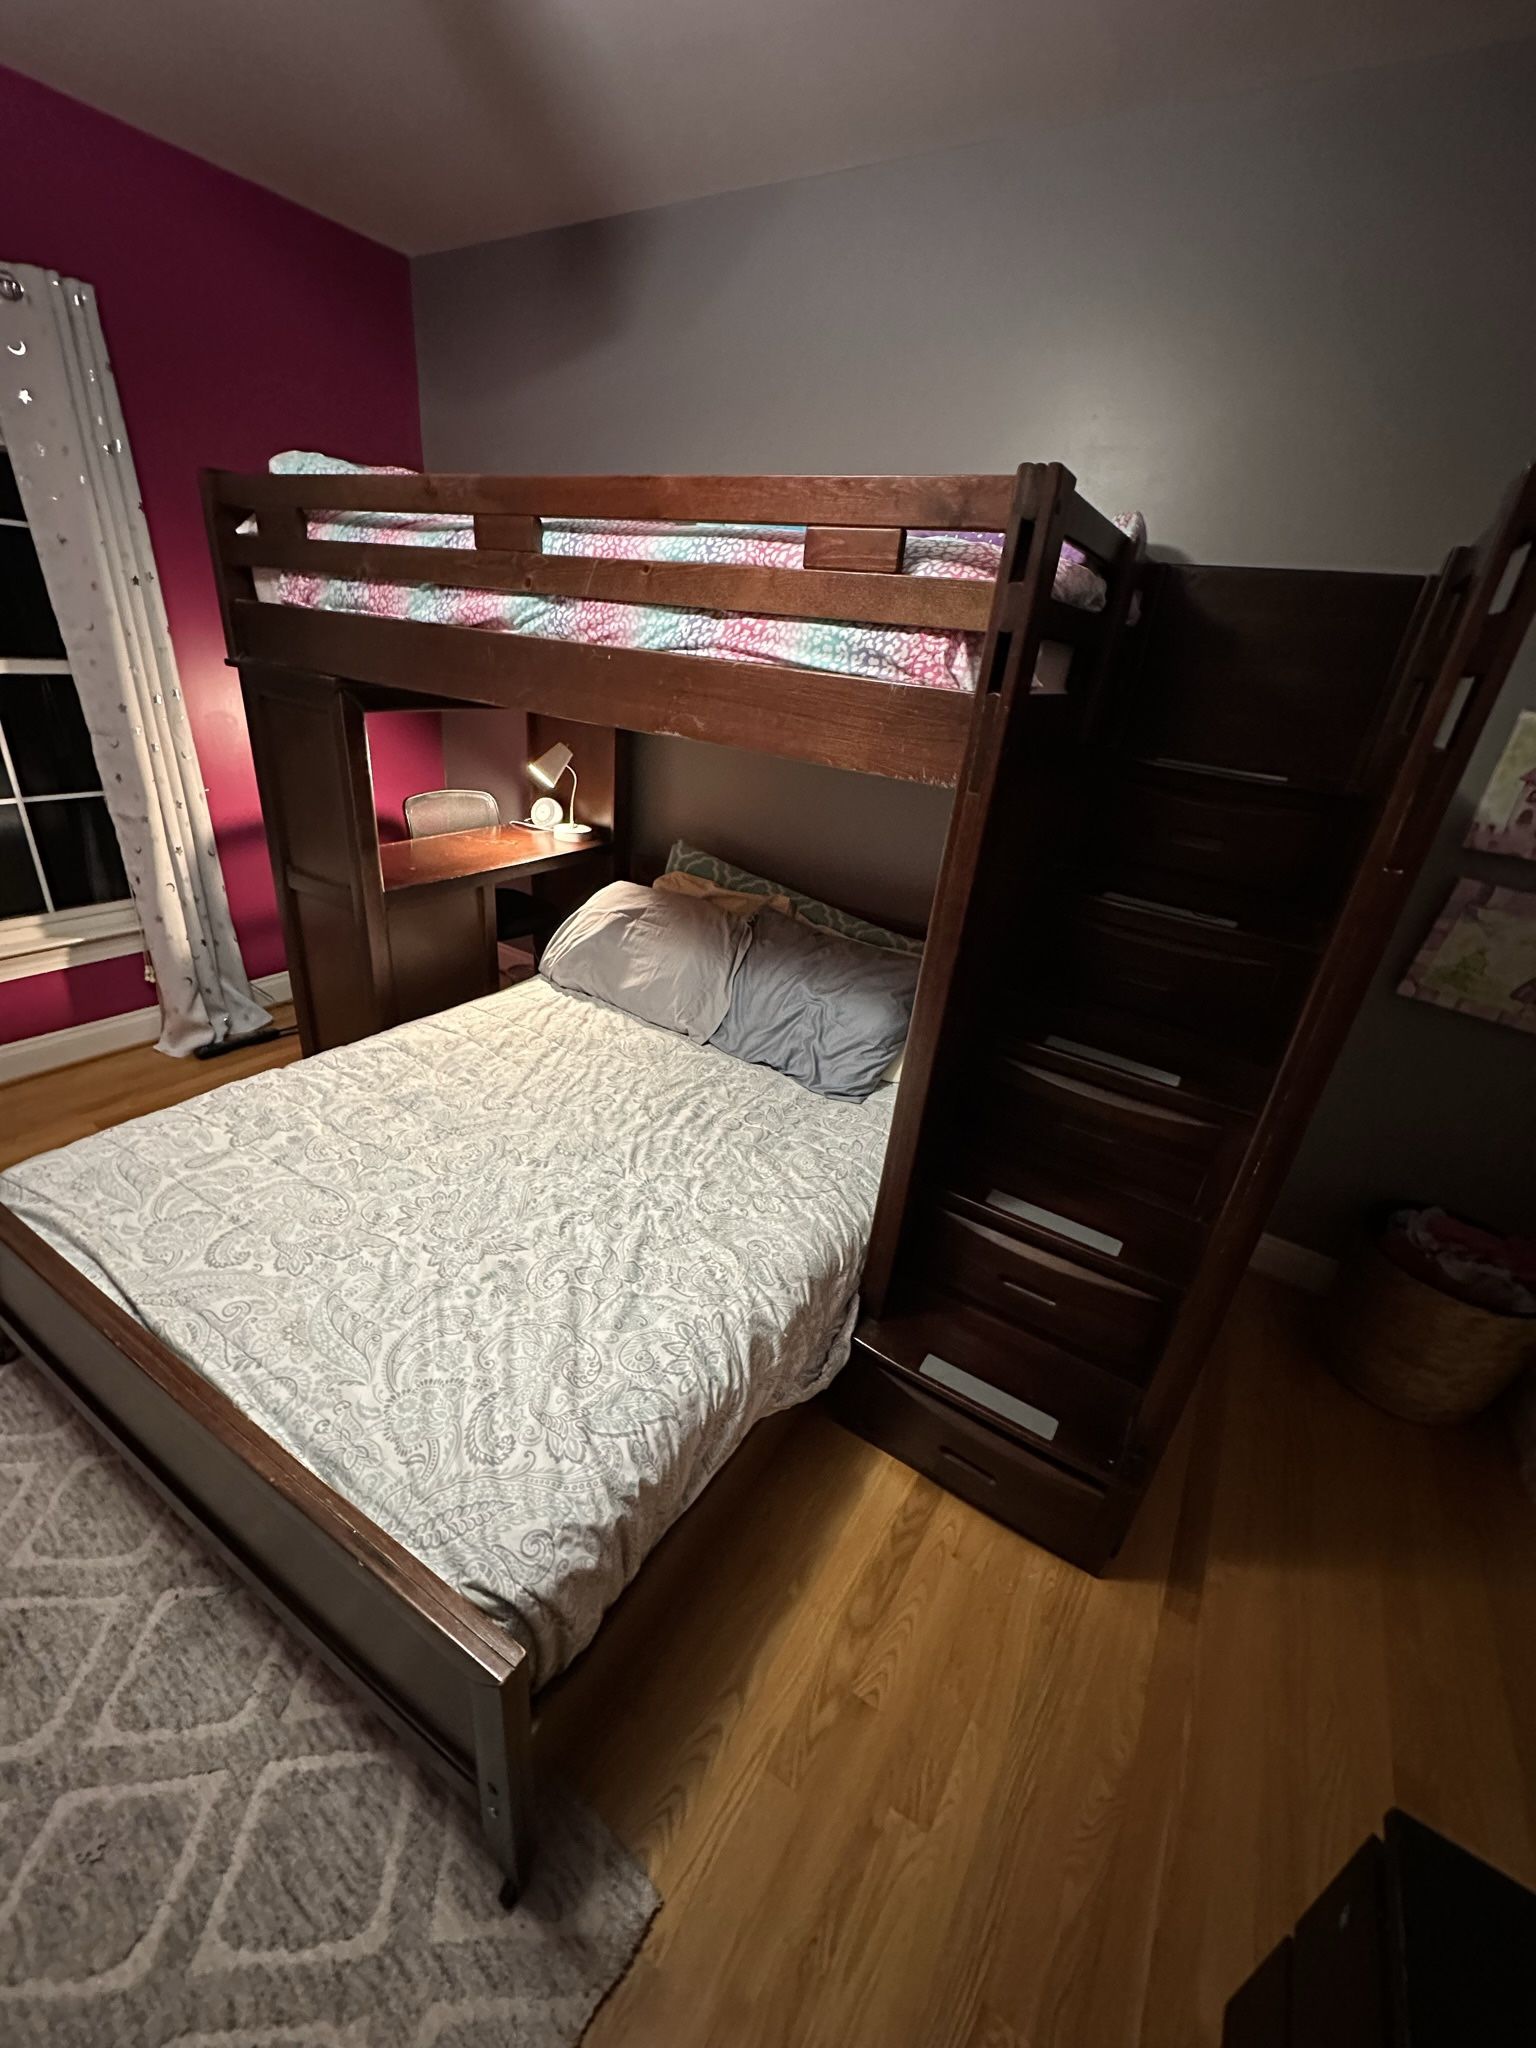 Solid wood multifunctional bunk bed set for sale for $385